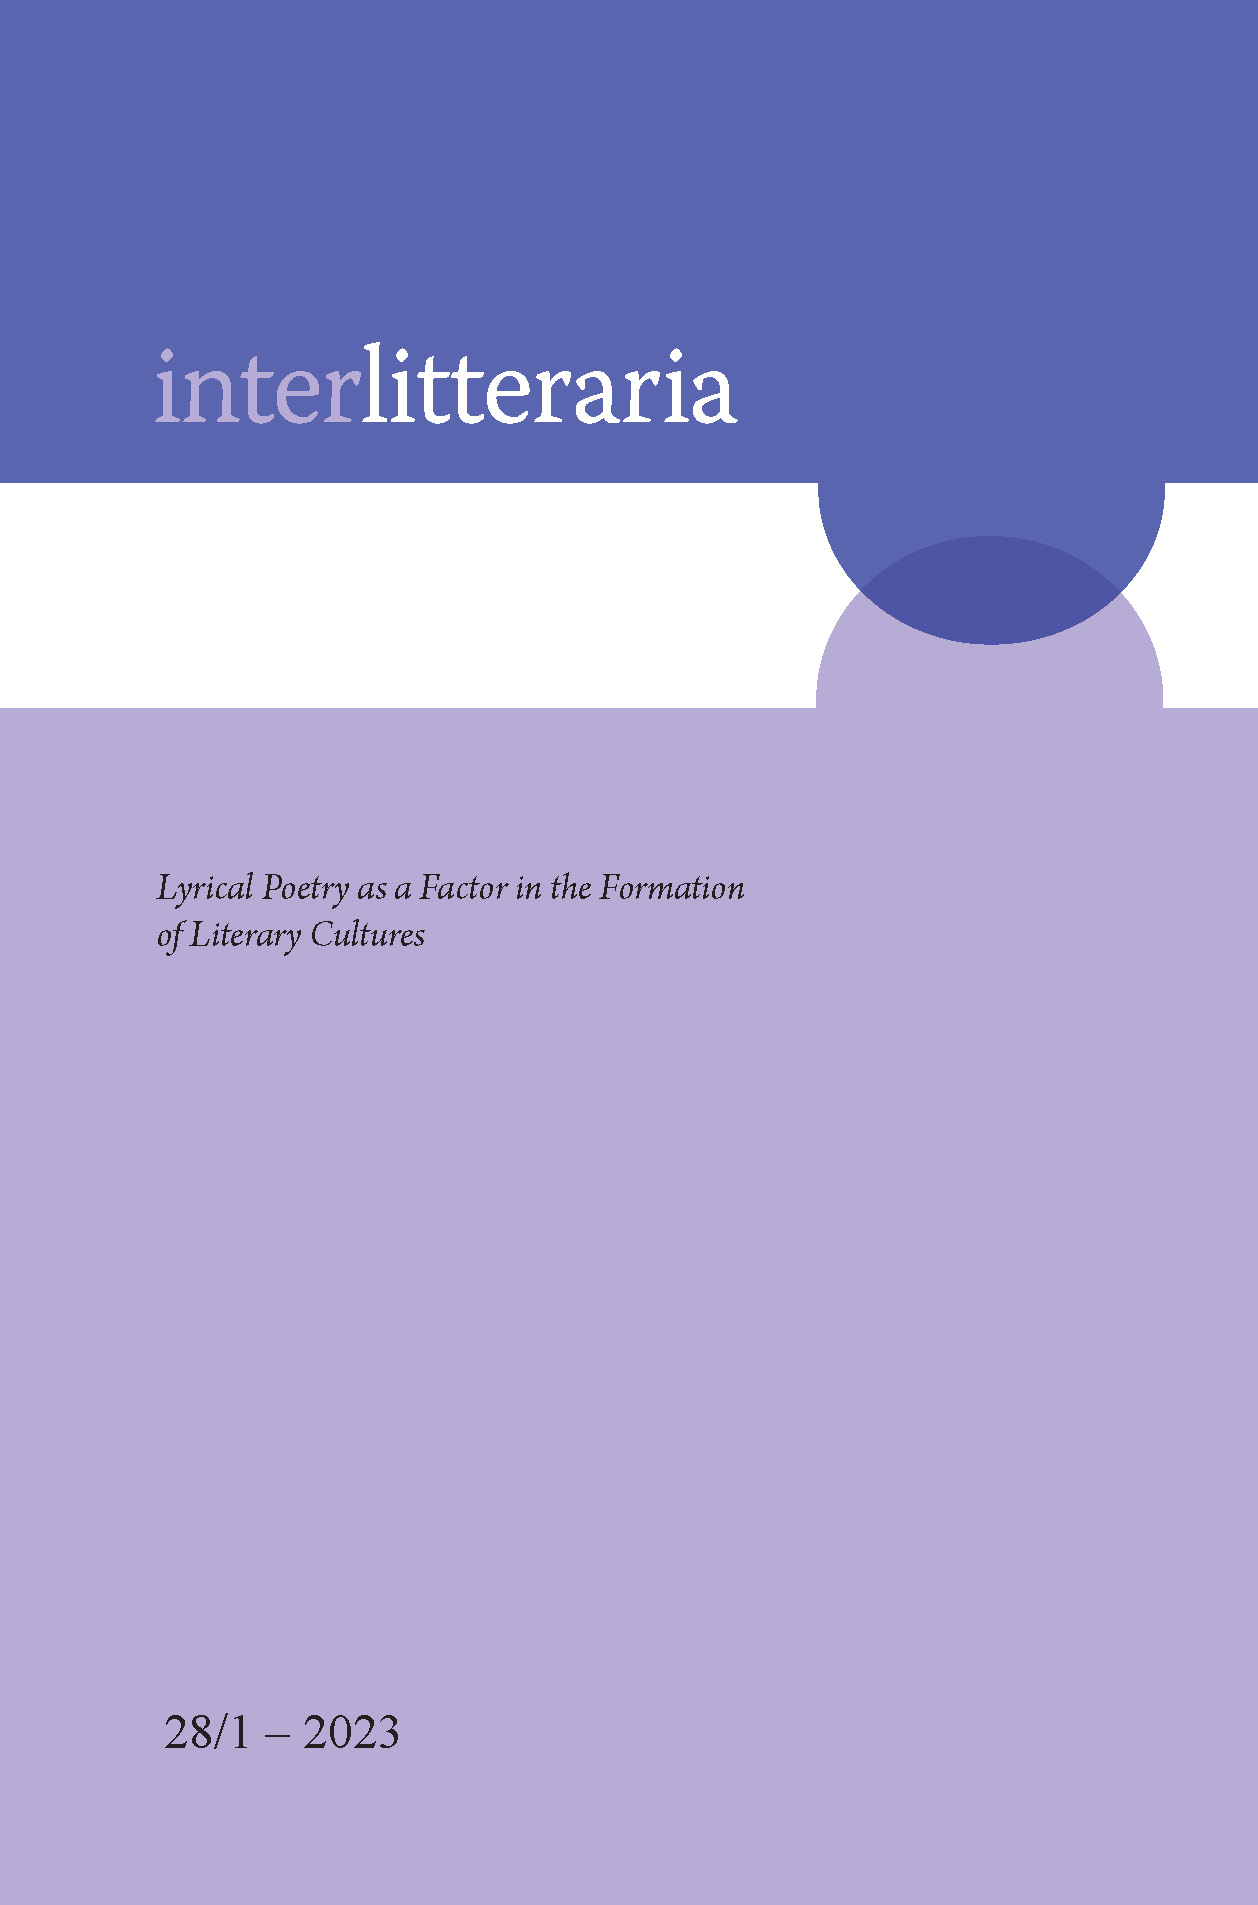 					View Vol. 28 No. 1 (2023): The Factor of Lyrical Poetry in the Formation of Literary Cultures
				